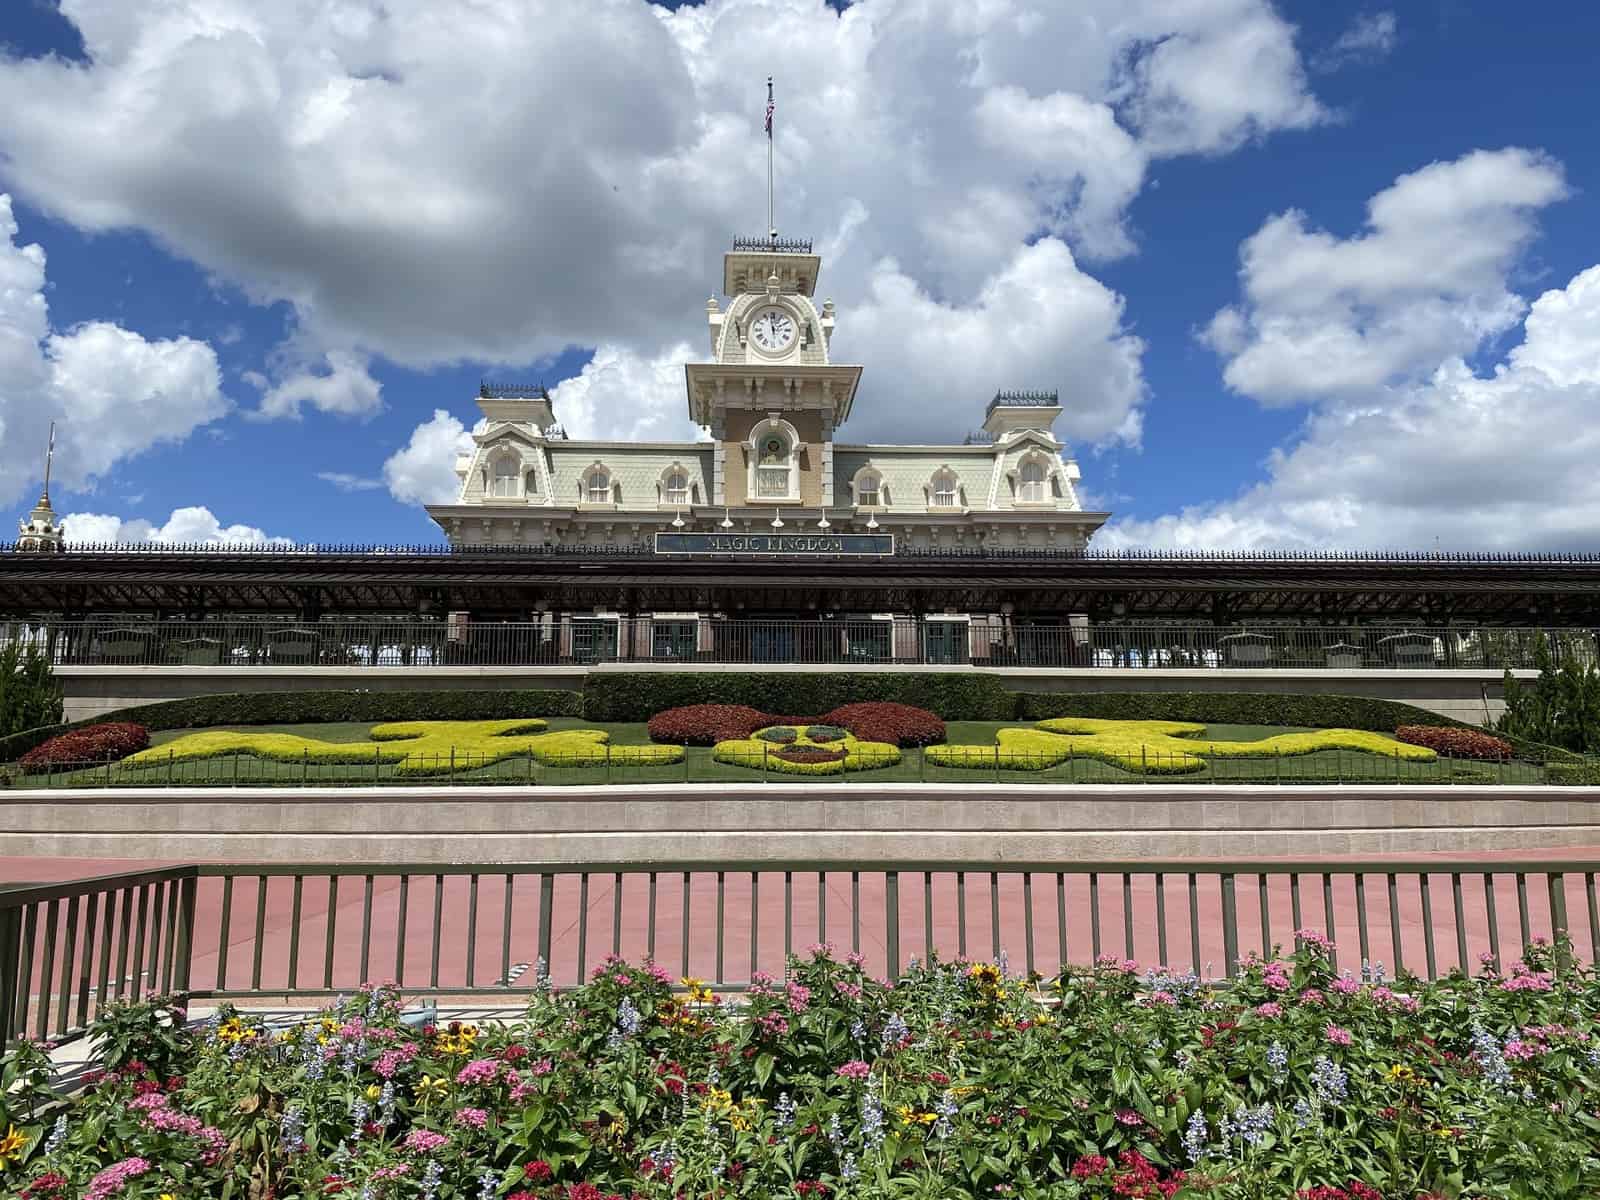 New 2021 Spring Into Magic Walt Disney World Offers Now Available